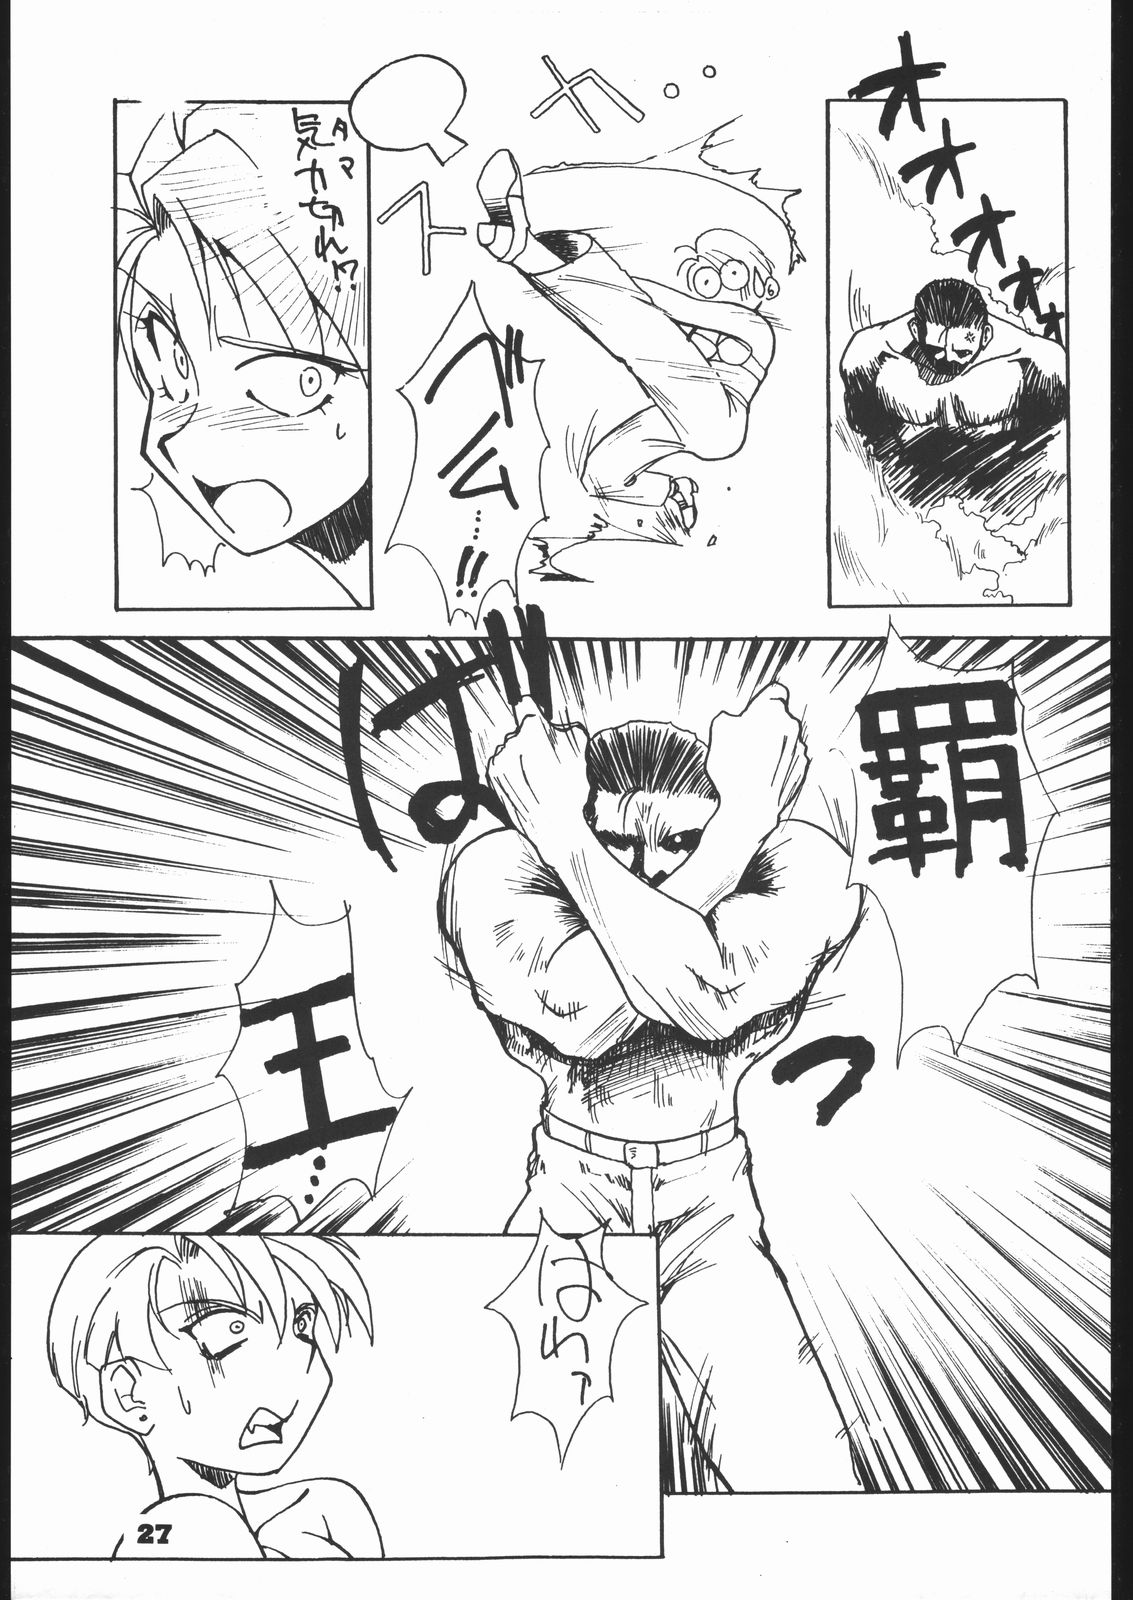 [Red Sox (Miura Takehiro)] Red Sox vol. 4 (Art of Fighting) [RED SOX (みうらたけひろ)] RED SOX vol.4 (龍虎の拳)